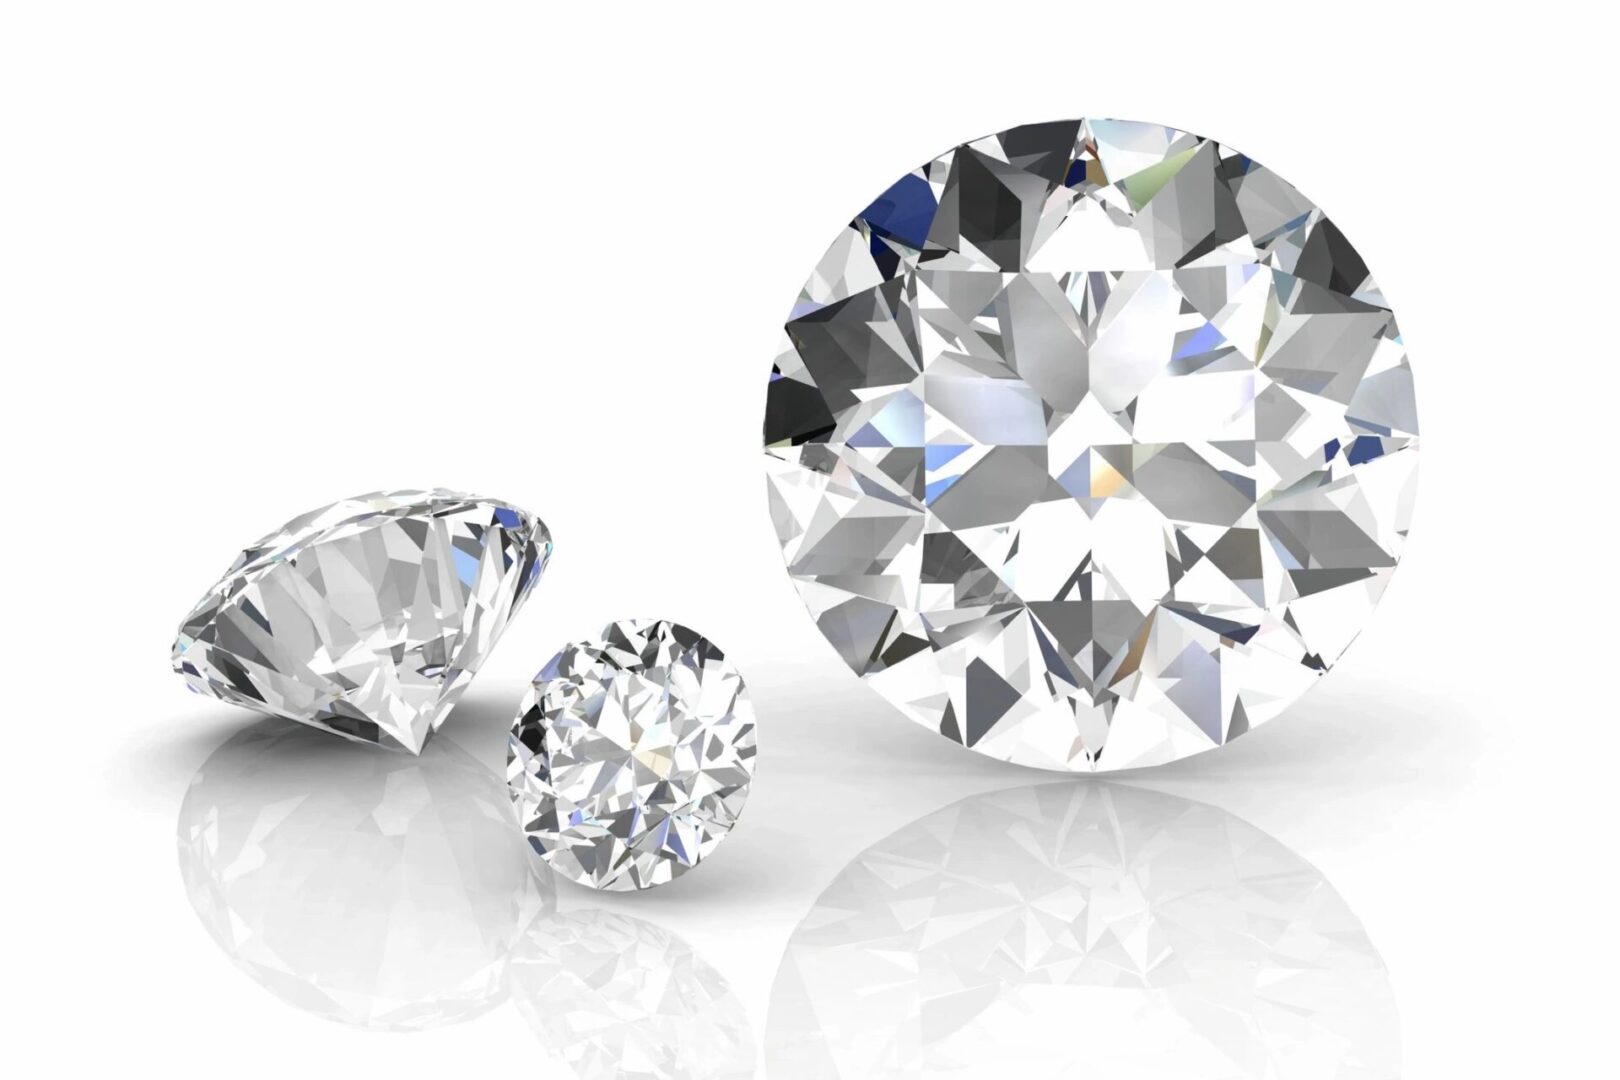 Three different sizes of diamonds are shown.